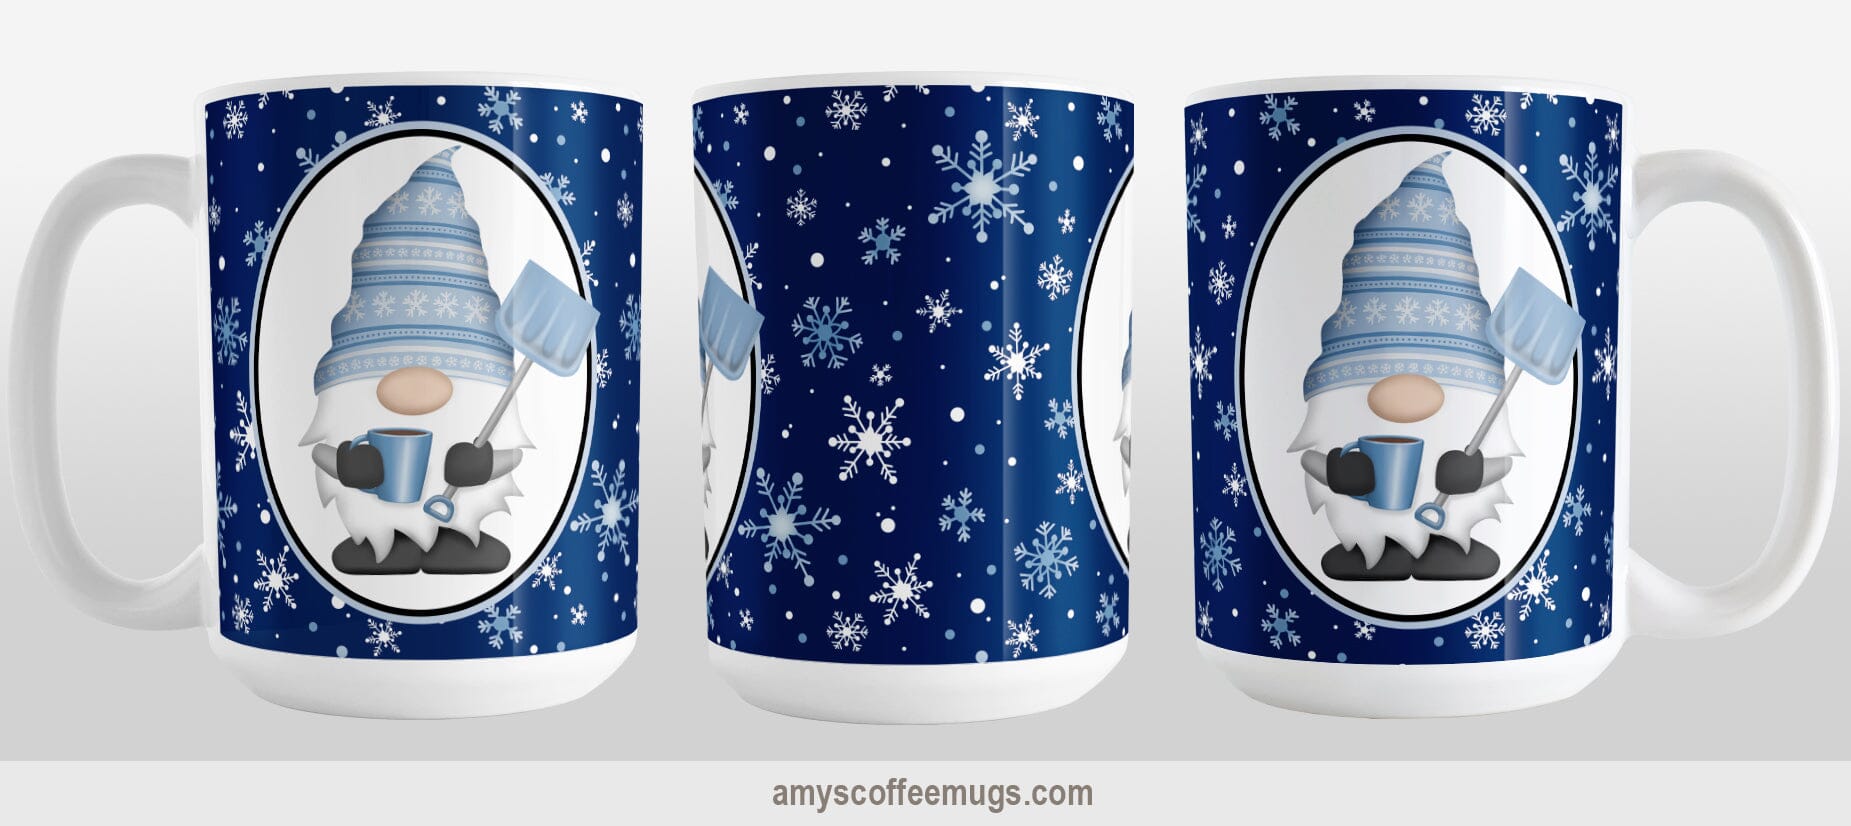 Blue Gnome Snowflakes Mug (15oz) at Amy's Coffee Mugs. A ceramic coffee mug designed with an adorable gnome wearing a festive blue winter hat and holding a hot beverage and a snow shovel in a white oval over a blue night snowflakes background that wraps around the mug to the handle. Photo shows 3 sides of the mug to view the entire printed design.